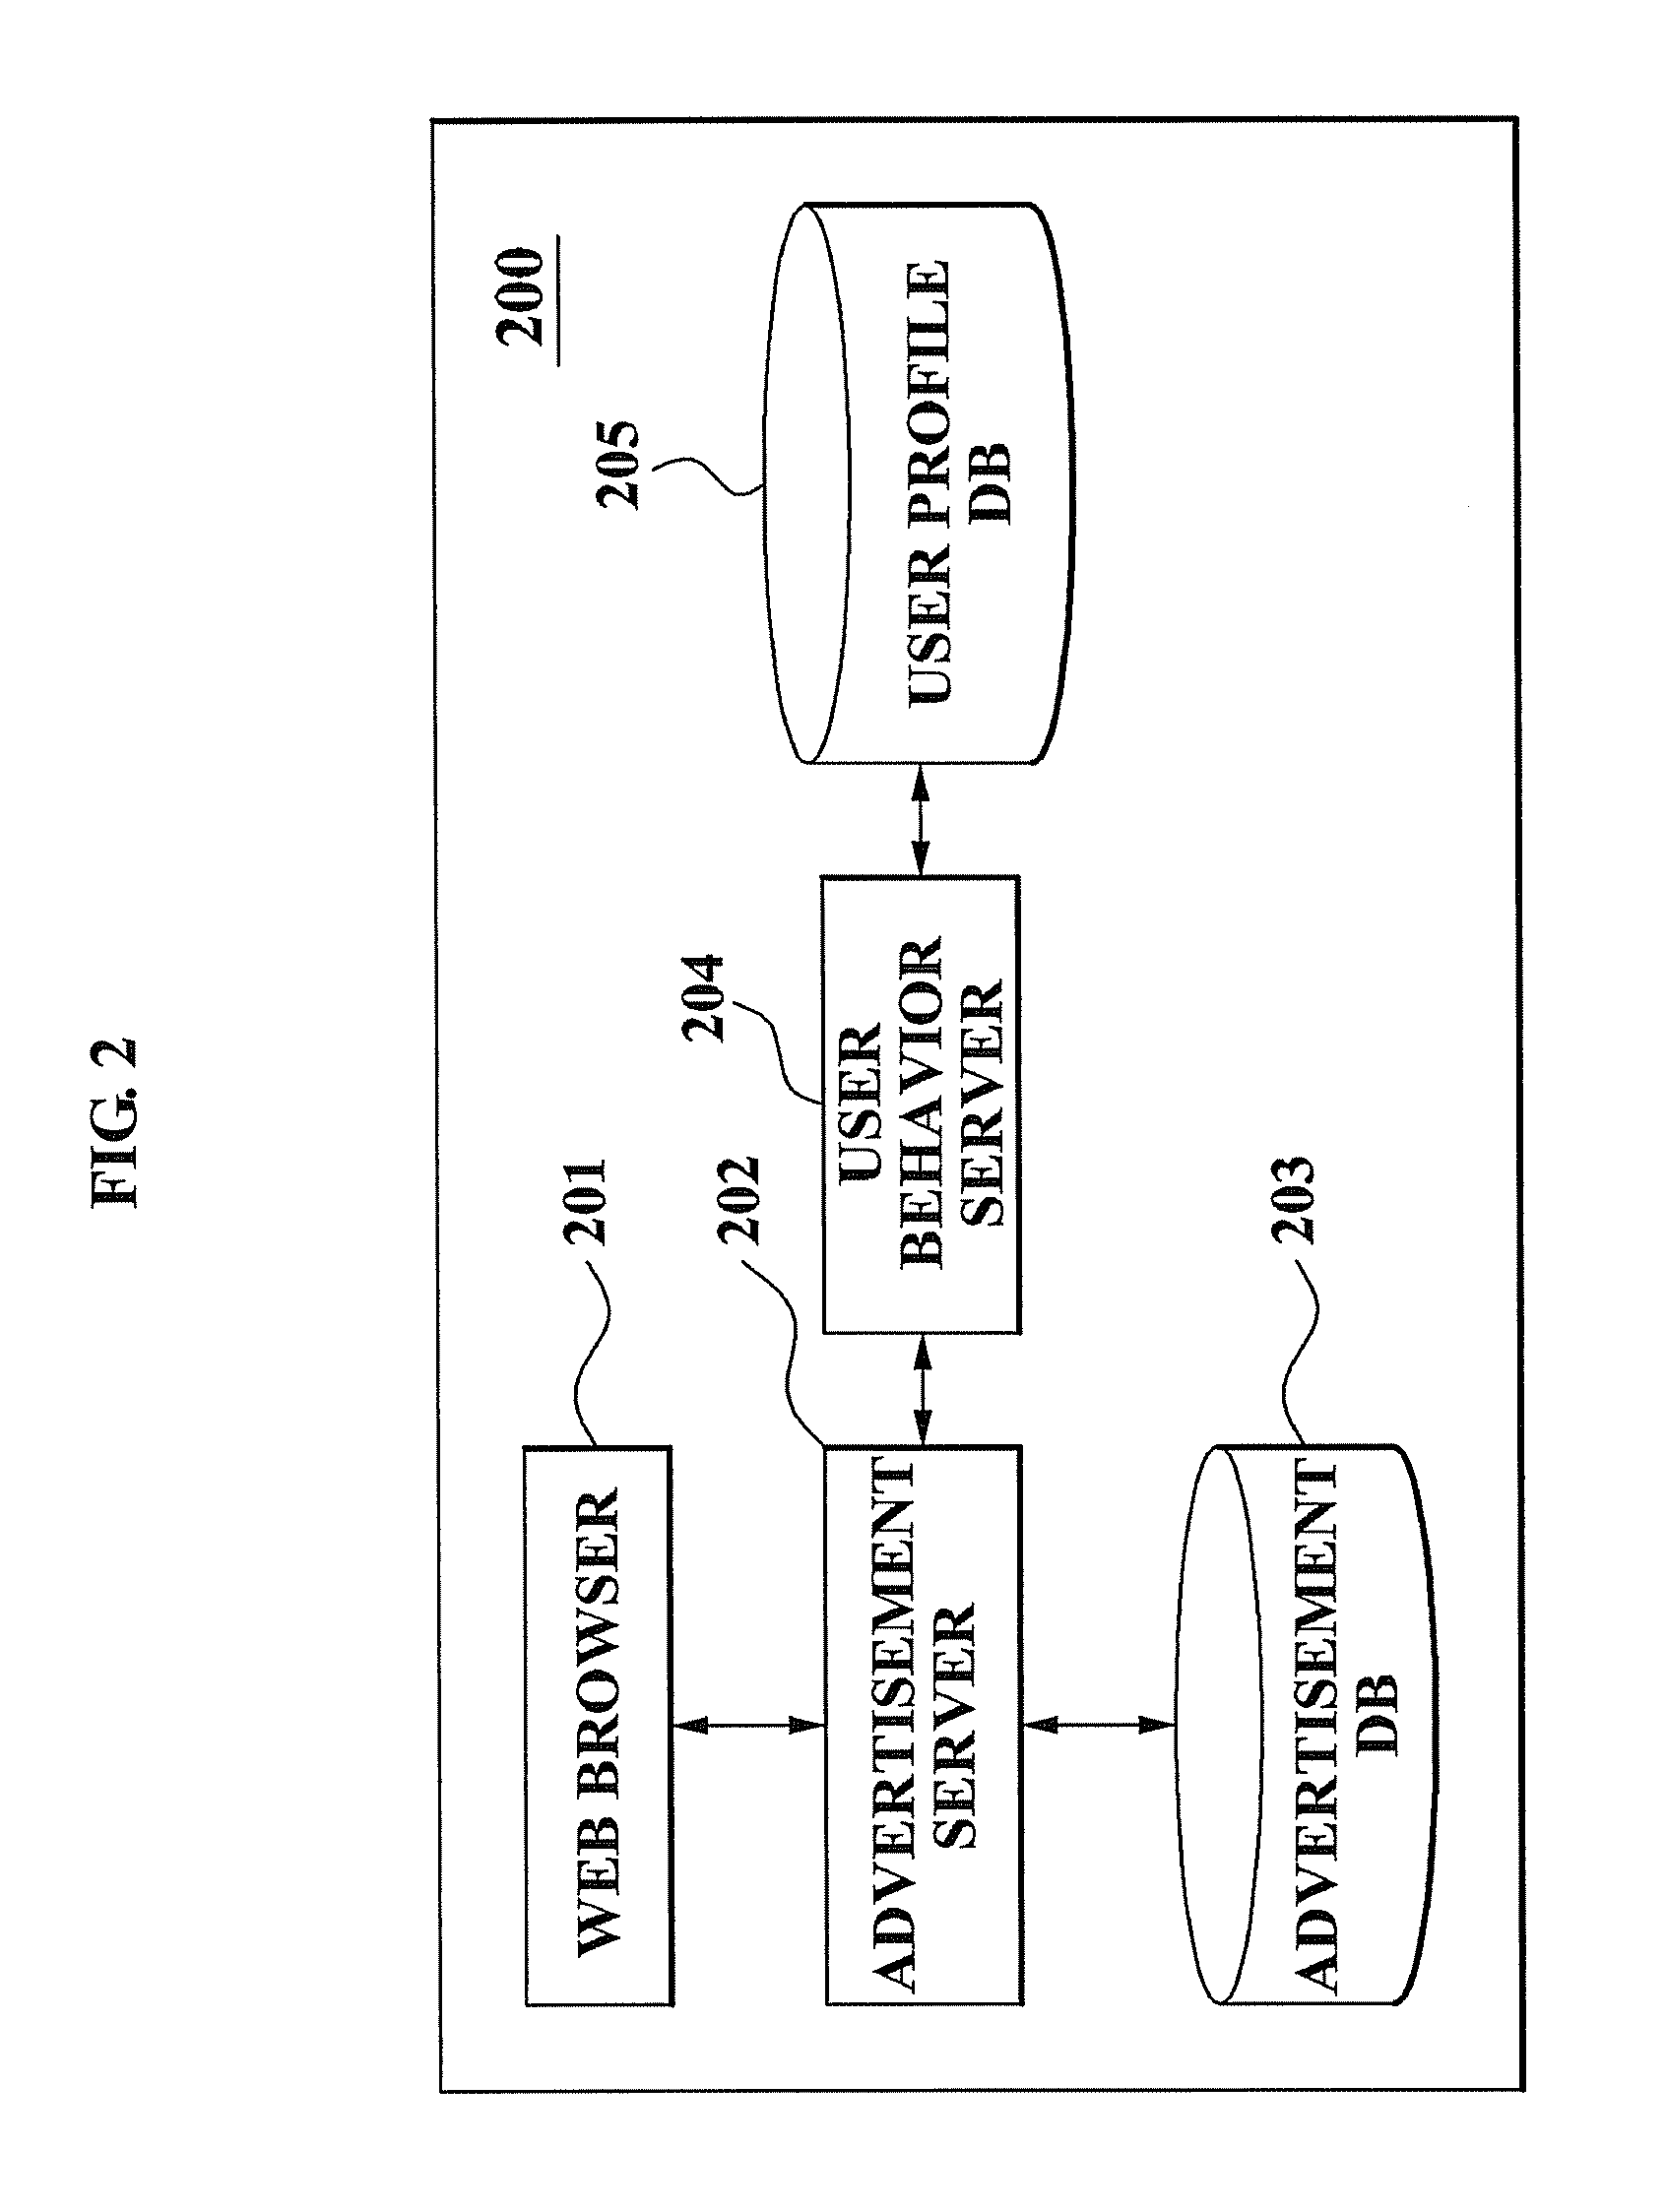 System and method for expanding target inventory according to browser-login mapping